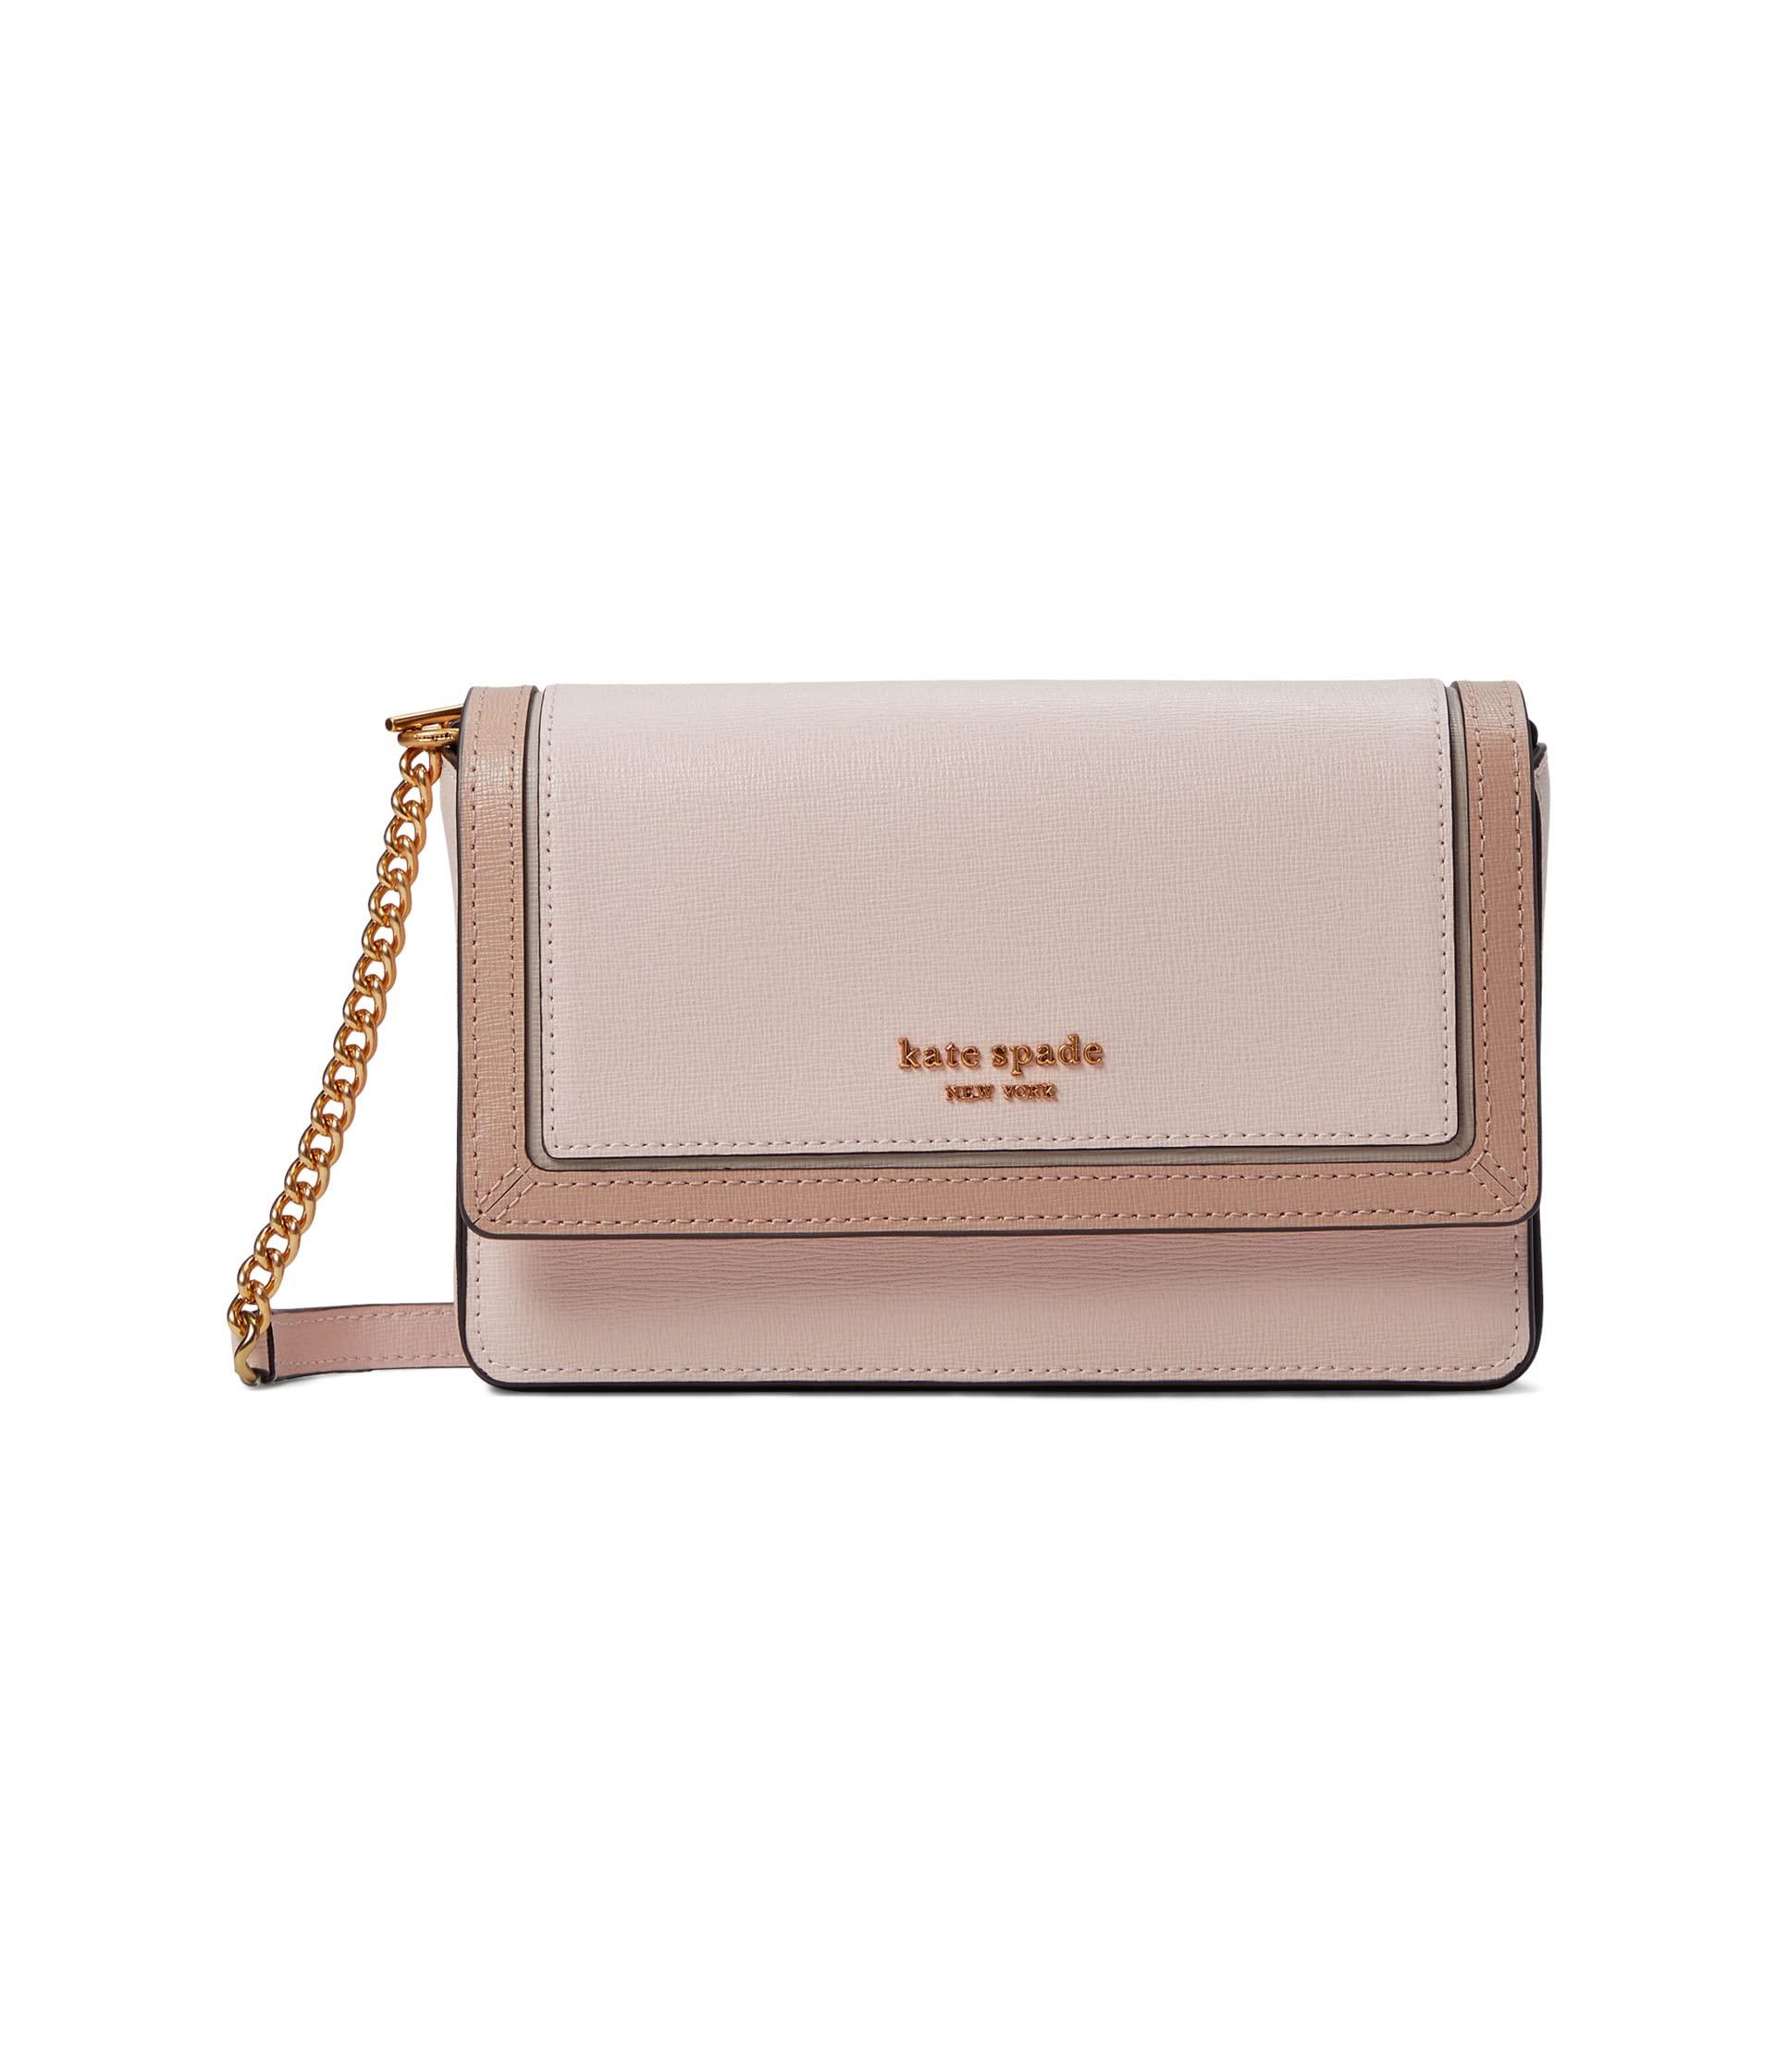 Kate Spade Morgan Color-blocked Saffiano Leather Flap Chain Wallet in ...